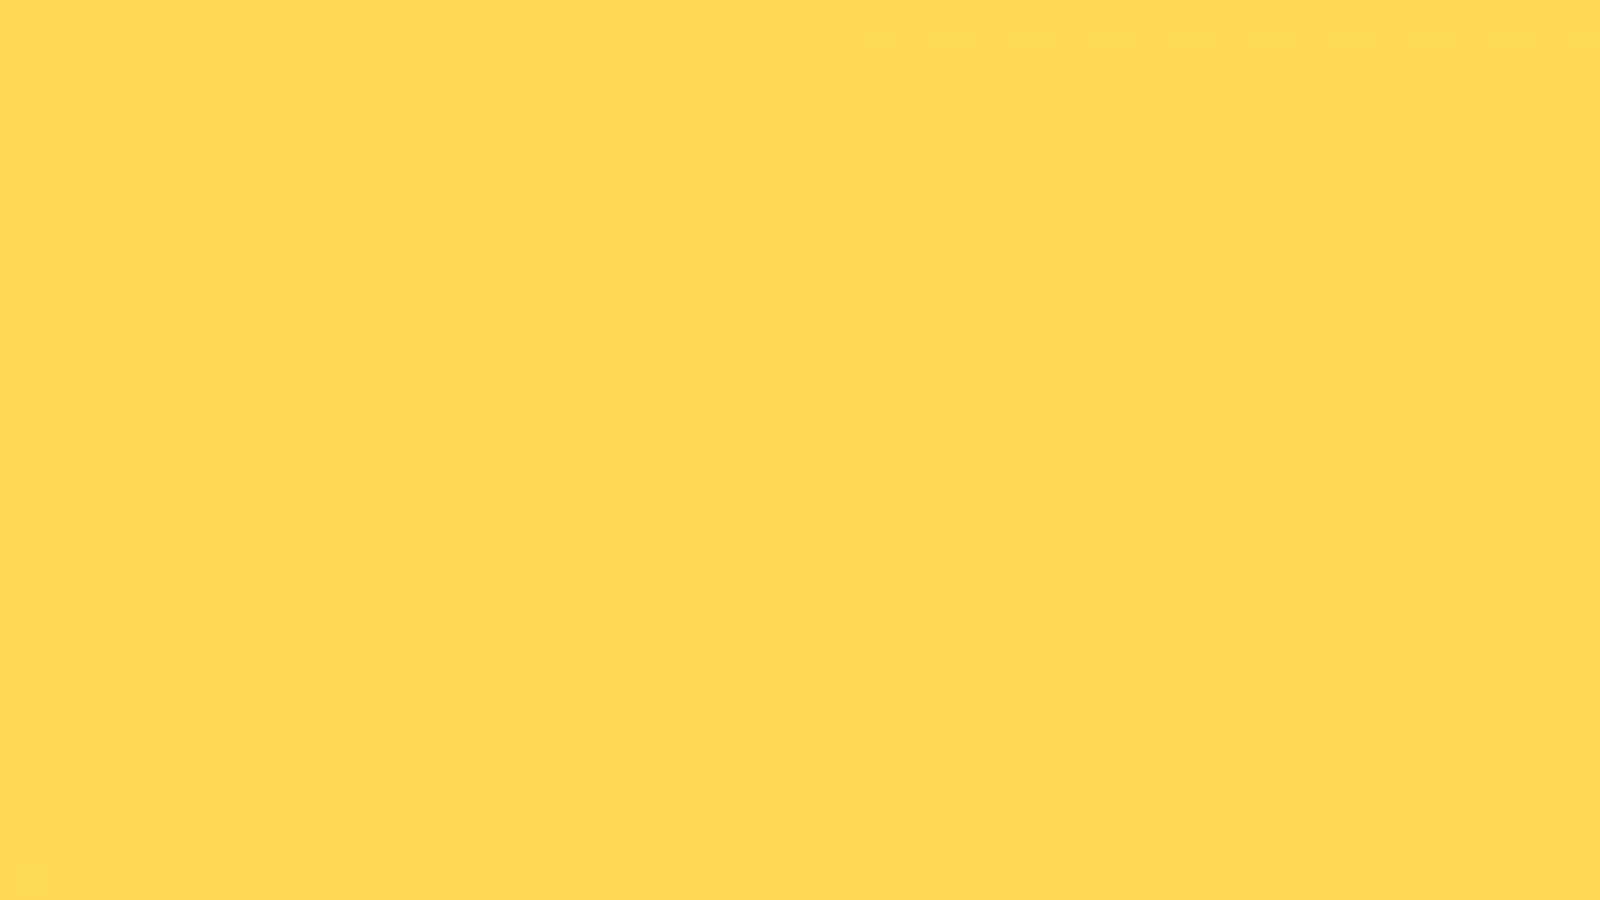 Mustard Color Wallpaper 01 0f 10 with Solid Color Background. HD